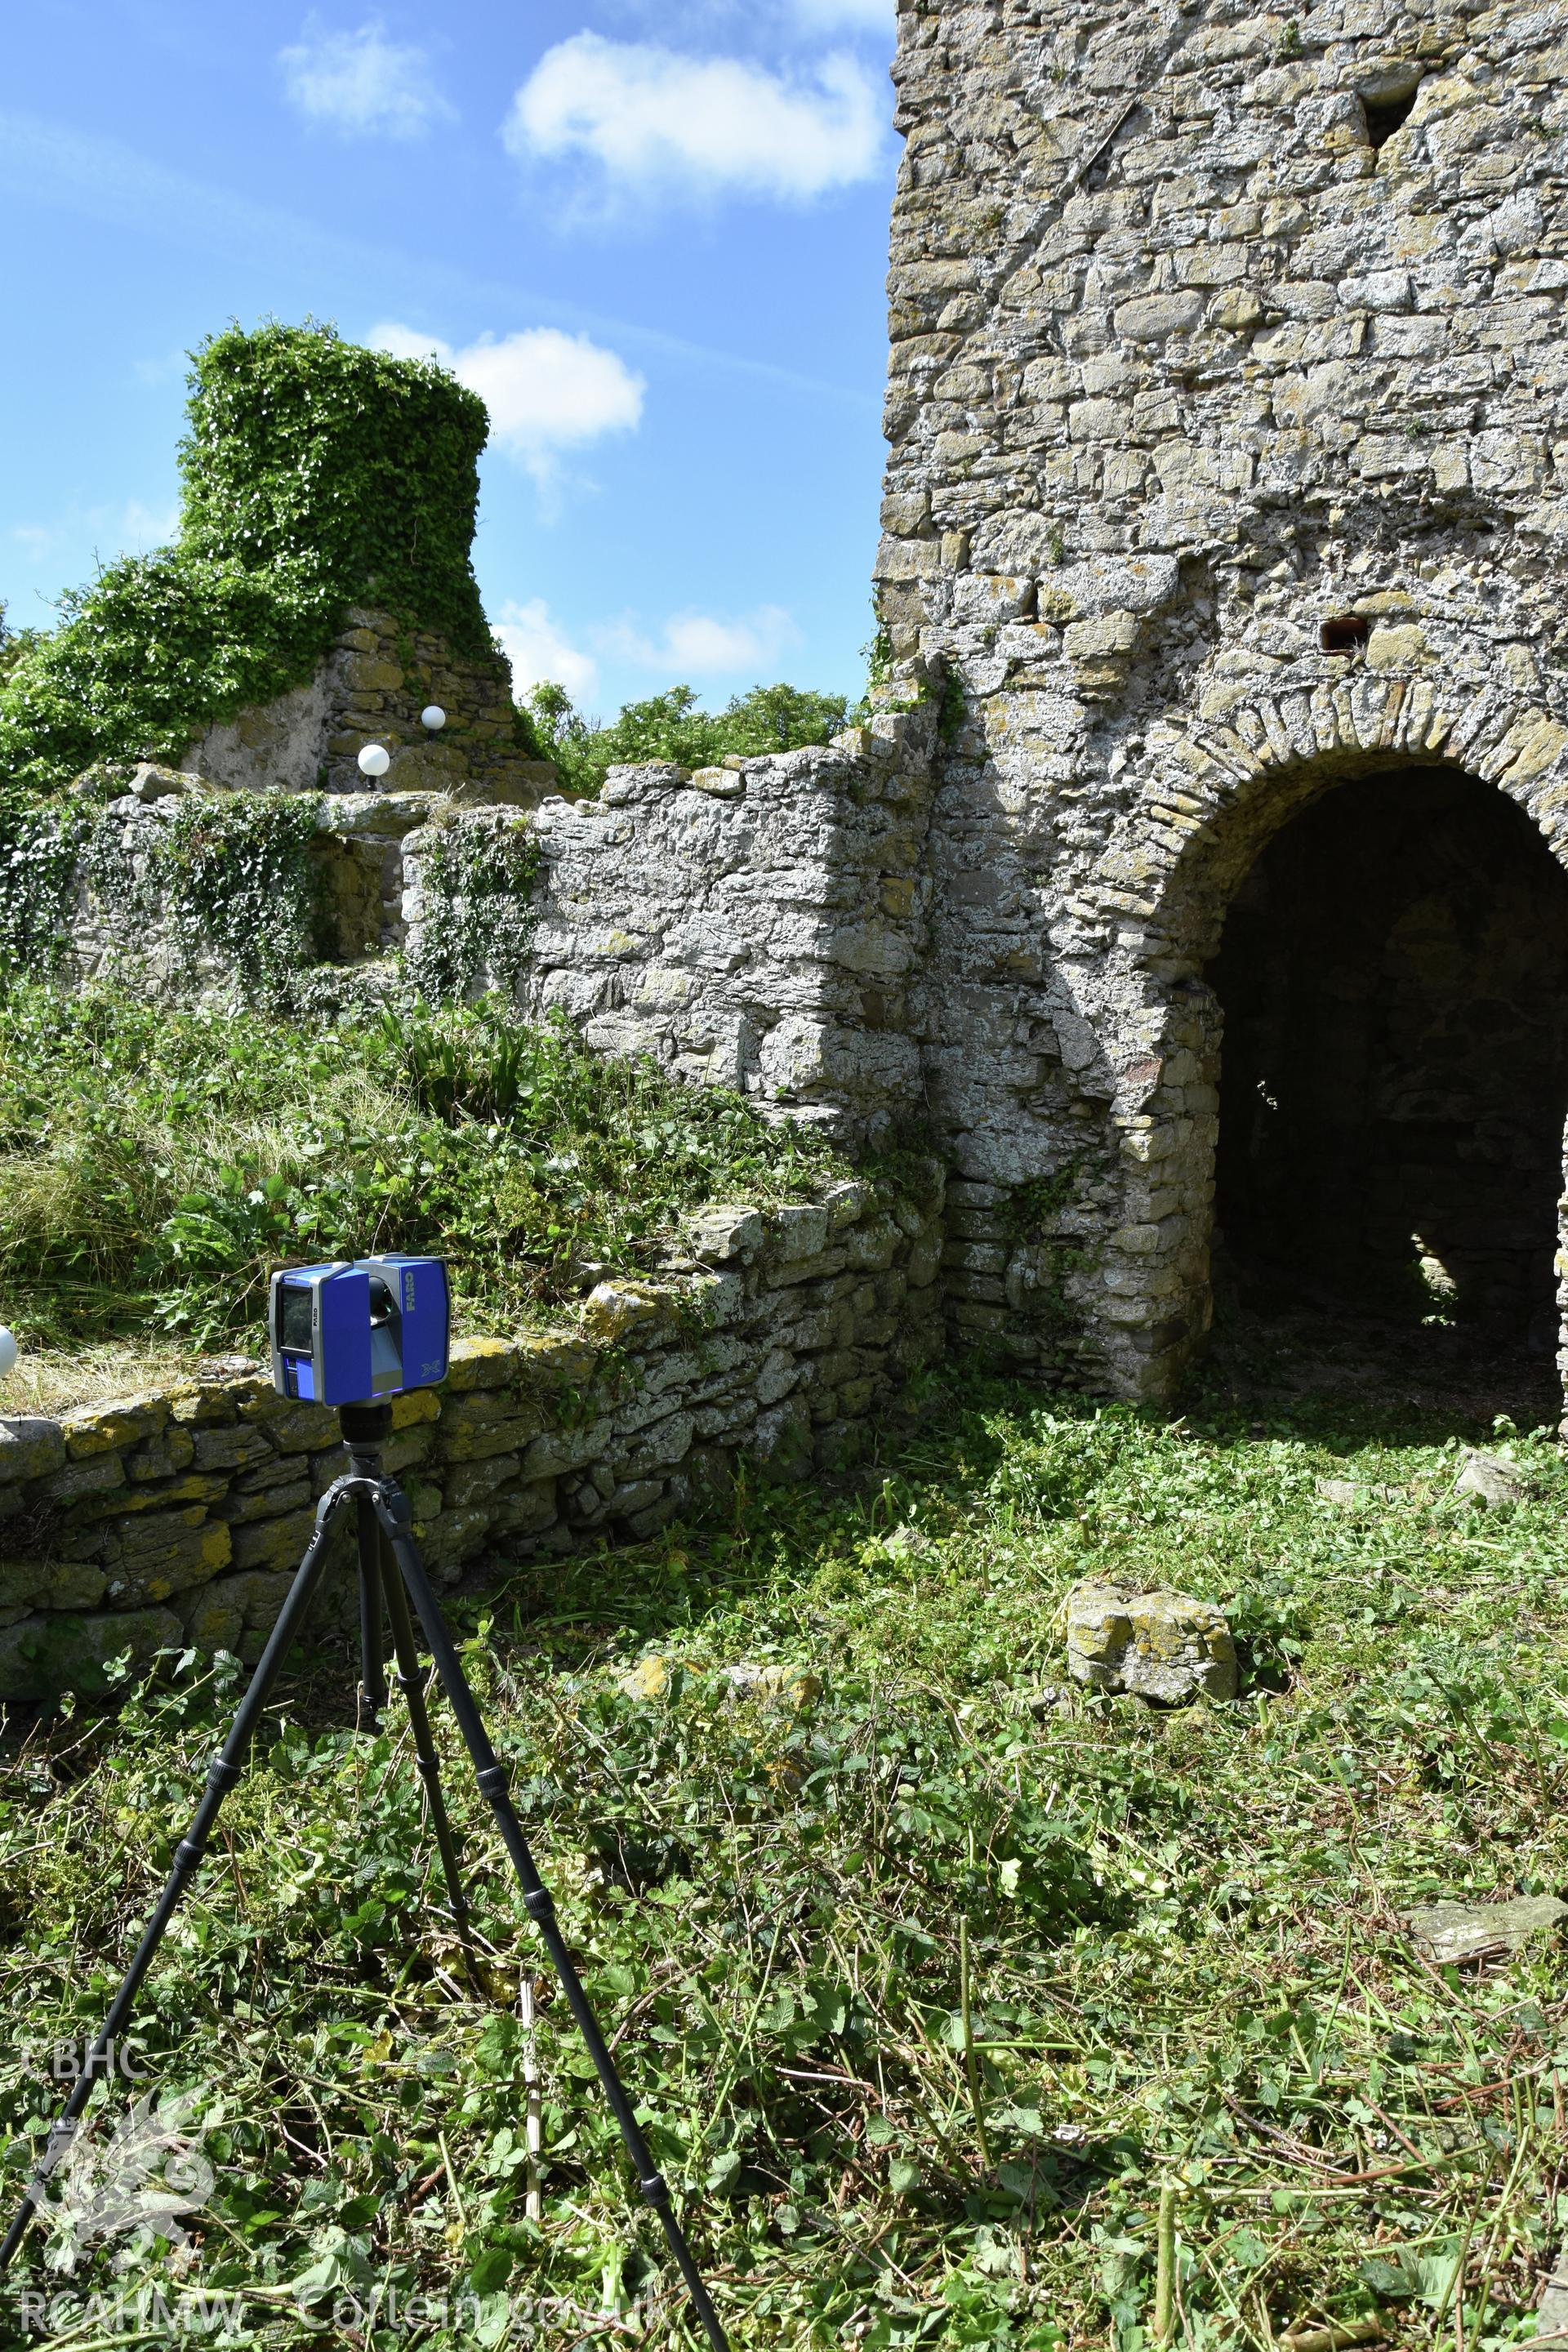 Investigator's photographic survey of the church on Puffin Island or Ynys Seiriol for the CHERISH Project. View showing survey work in the chancel to the east of the tower following vegetation clearance. ? Crown: CHERISH PROJECT 2018. Produced with EU funds through the Ireland Wales Co-operation Programme 2014-2020. All material made freely available through the Open Government Licence.